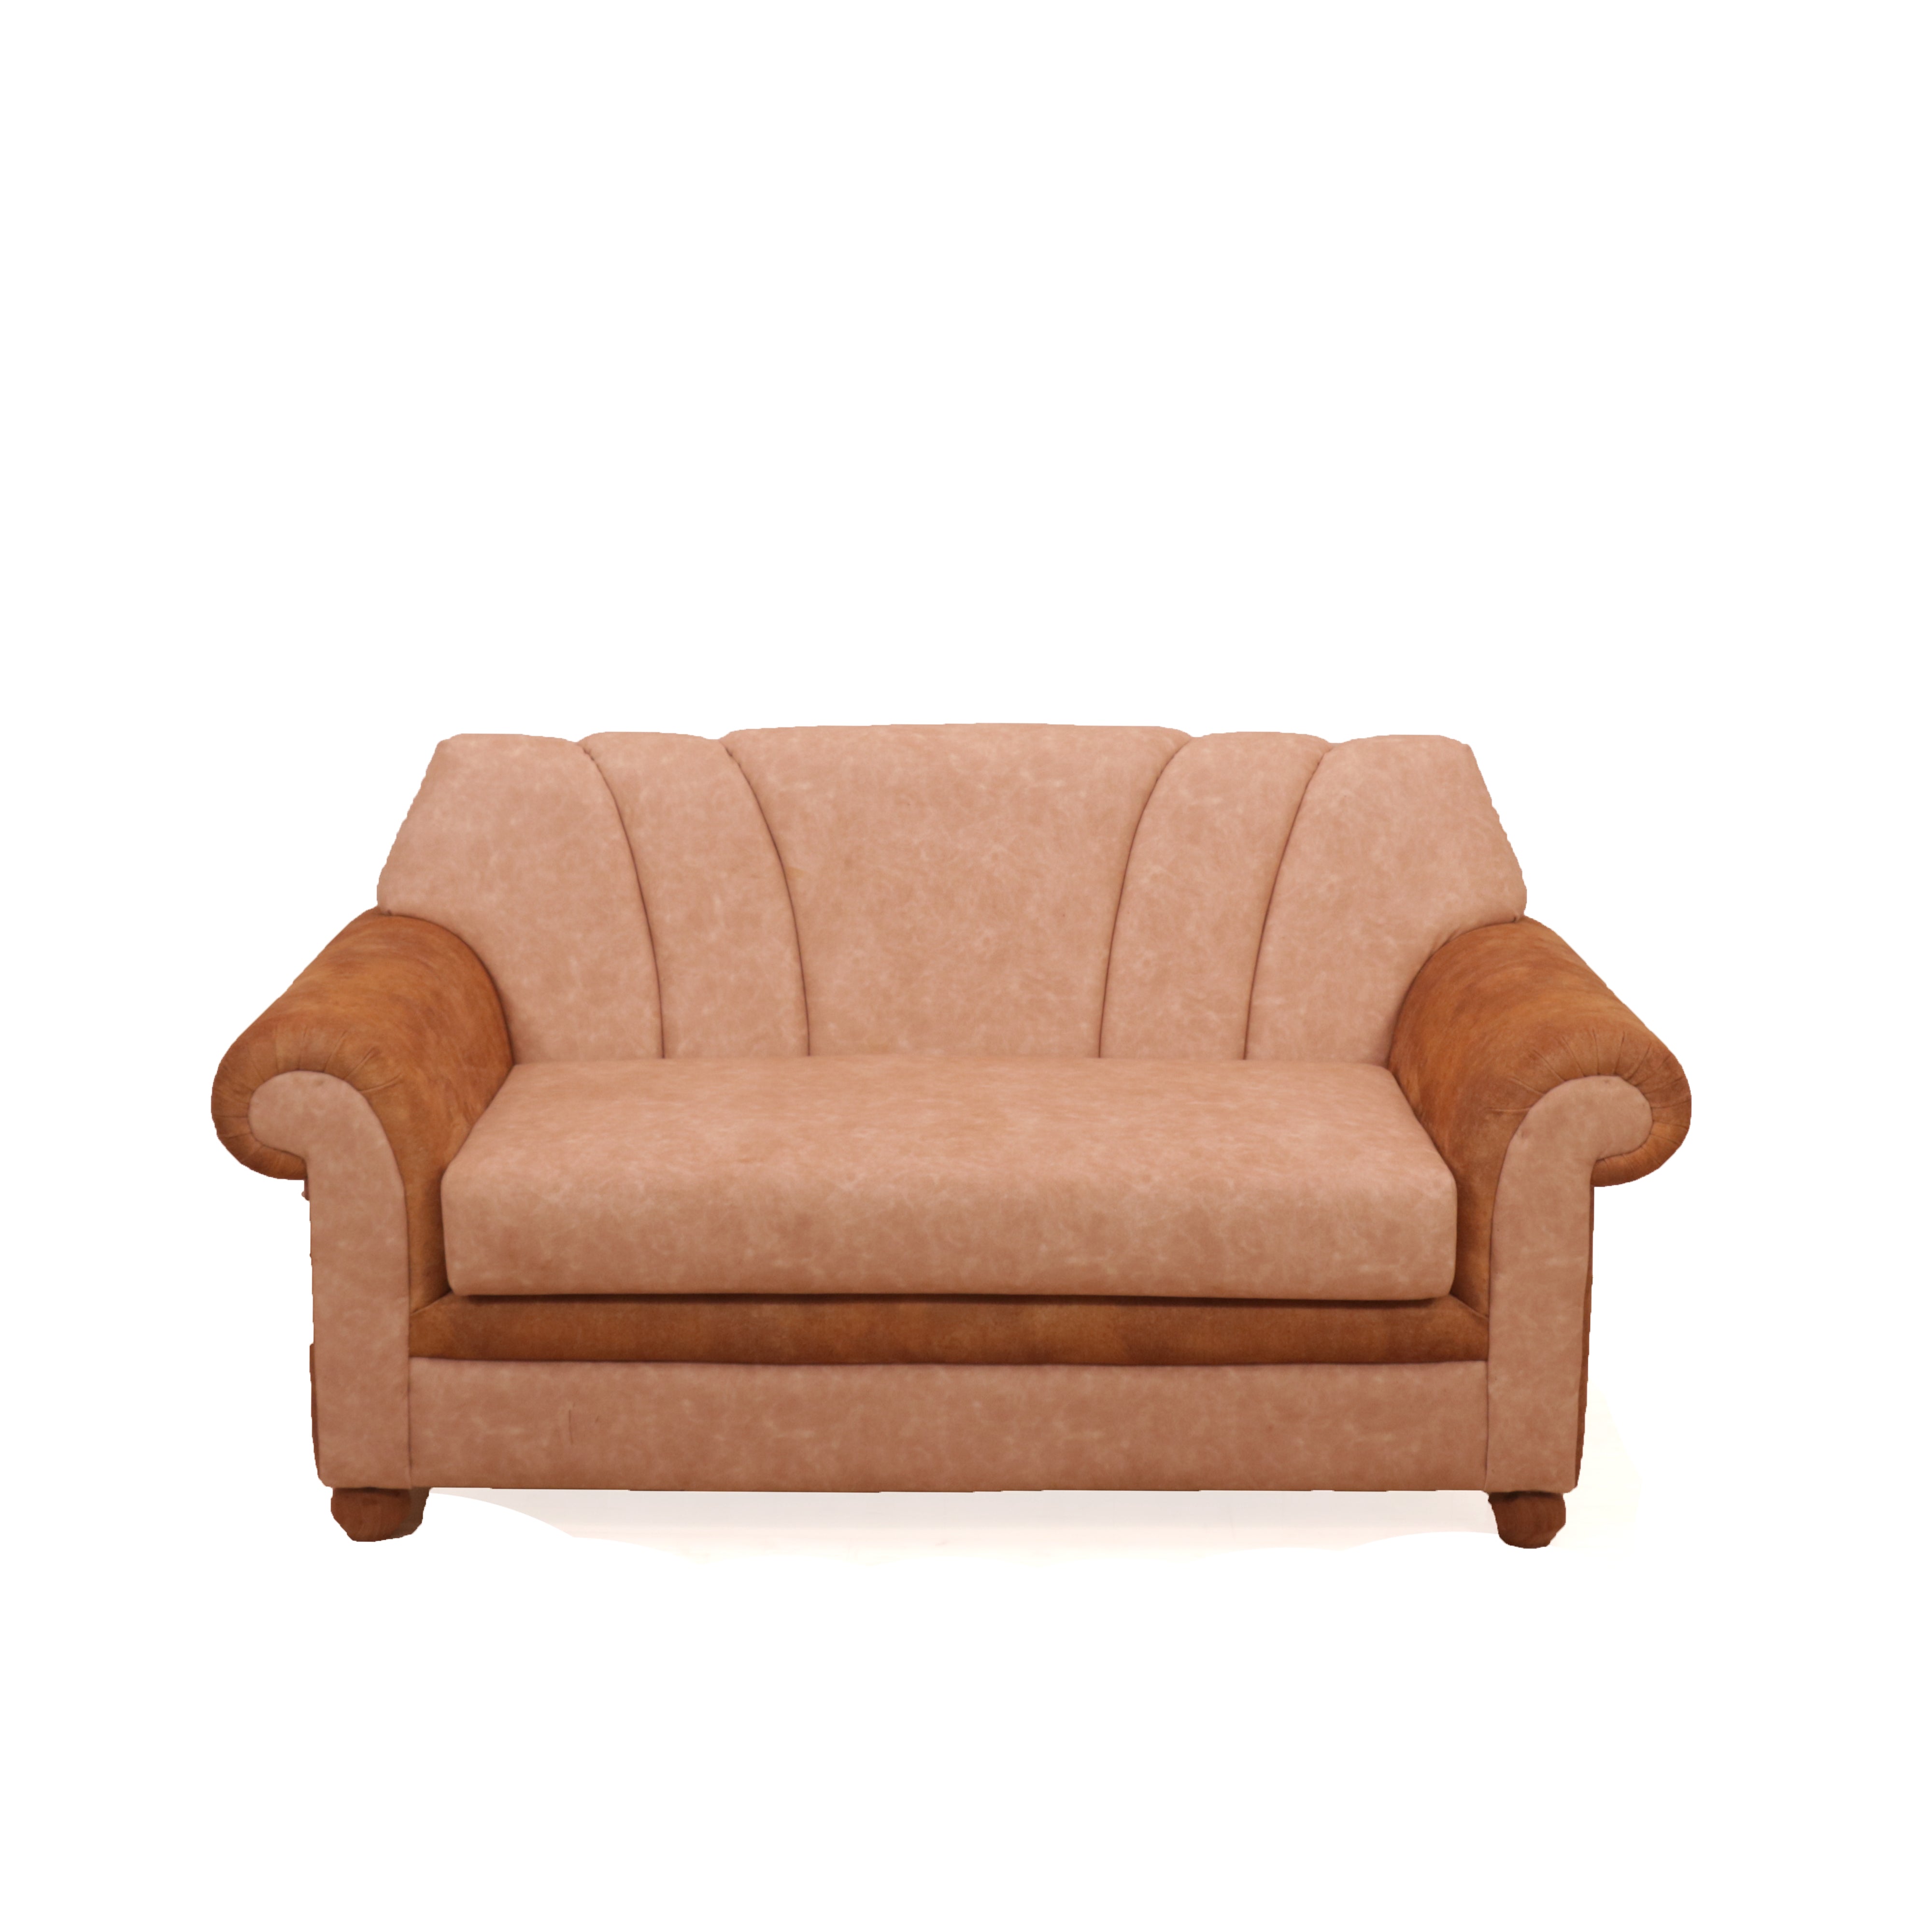 Layered Upholstered Beige Couch Sofa